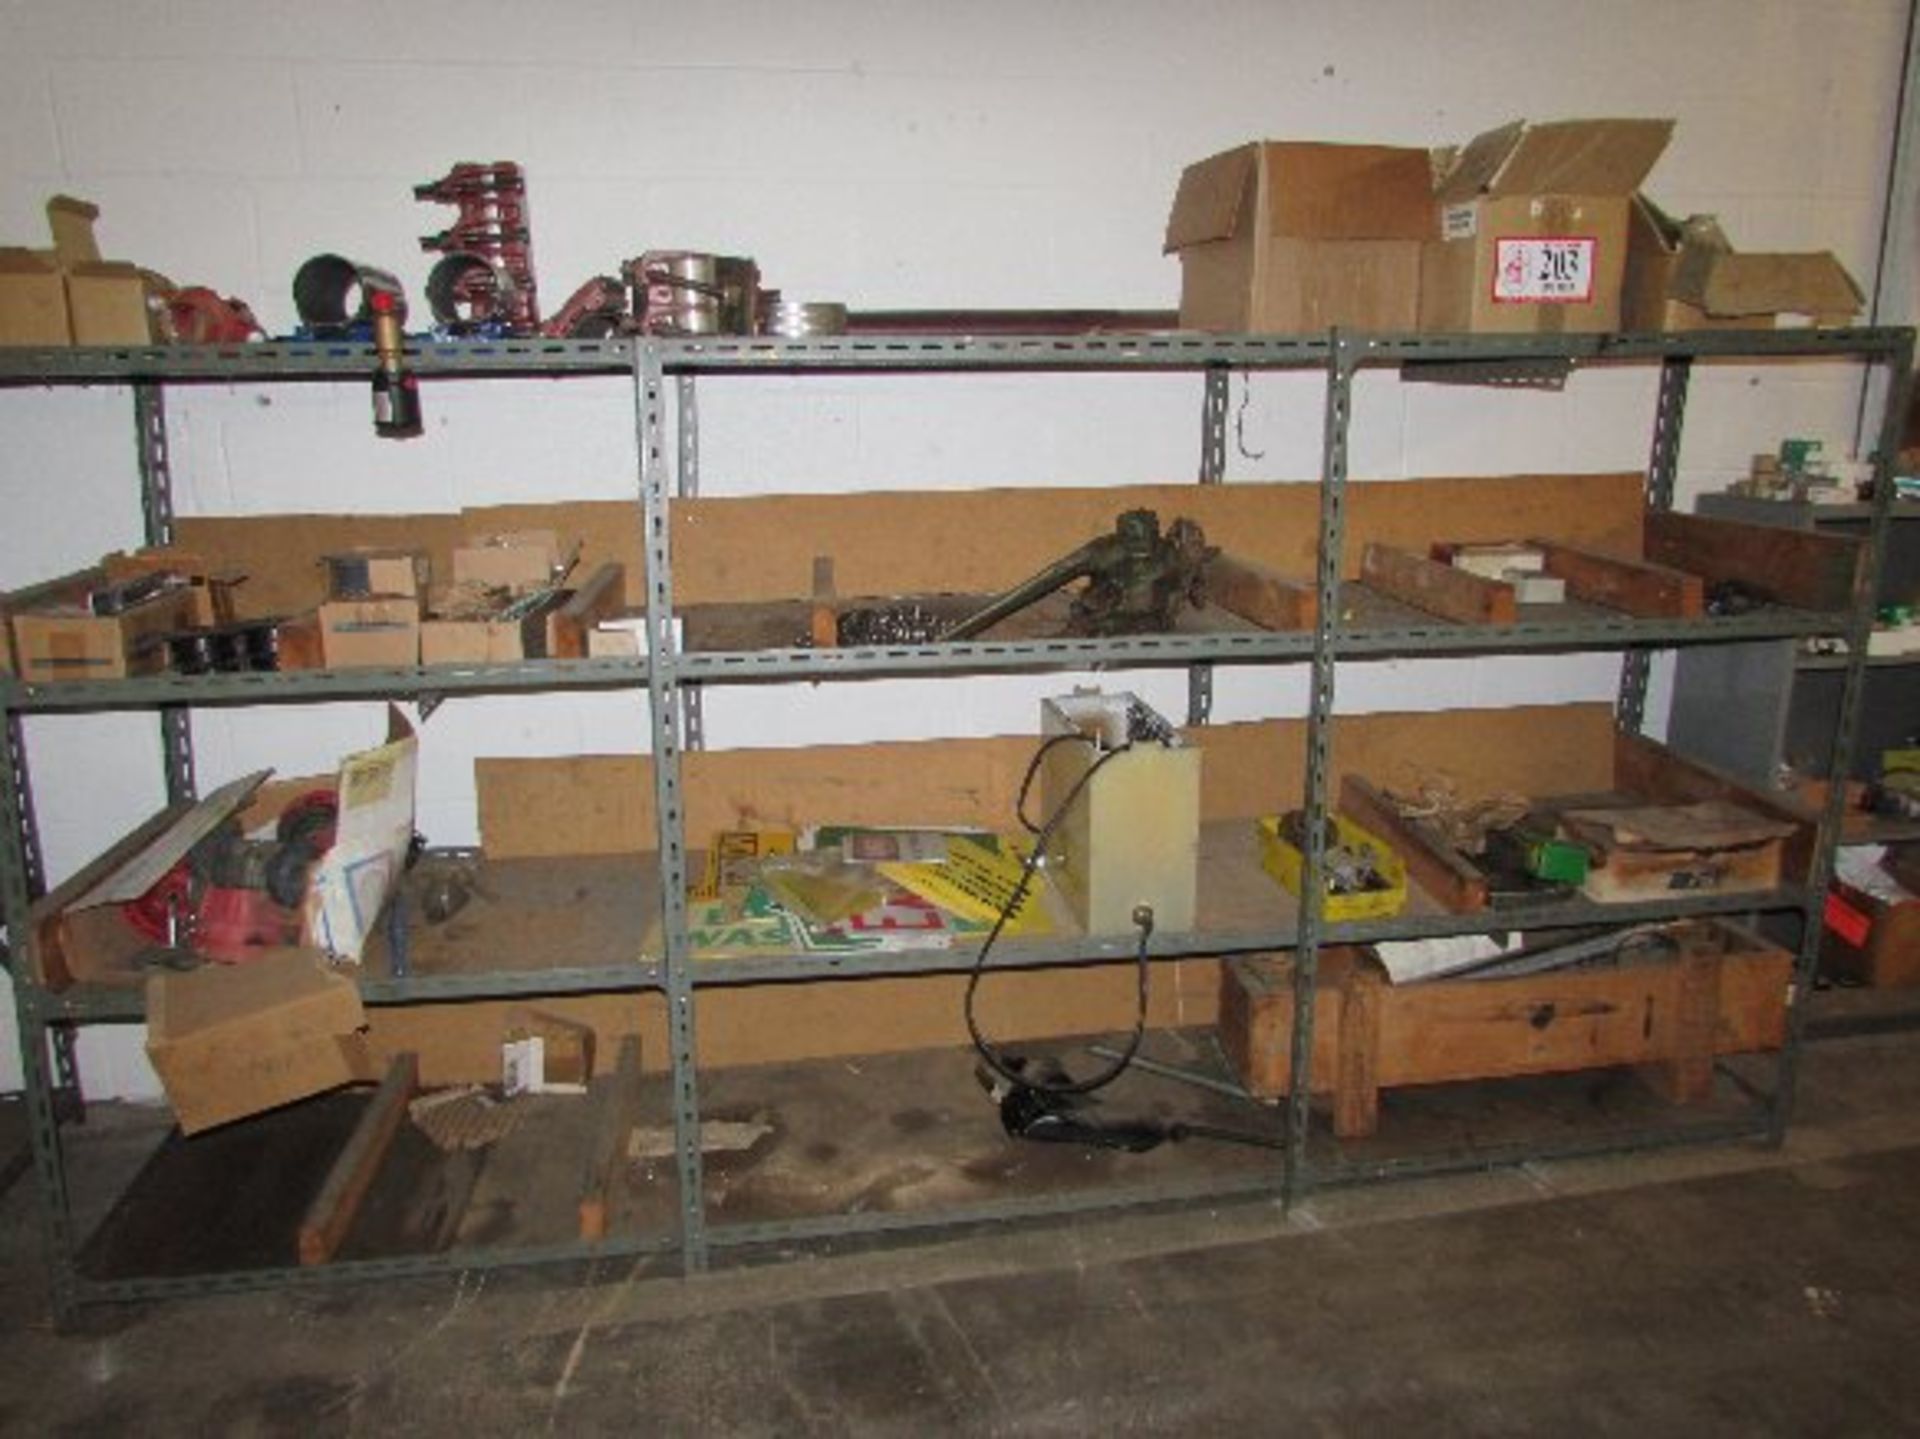 Contents (3) Sections Metal Racking, Chain, Pipe Repair Kits, Signs, etc